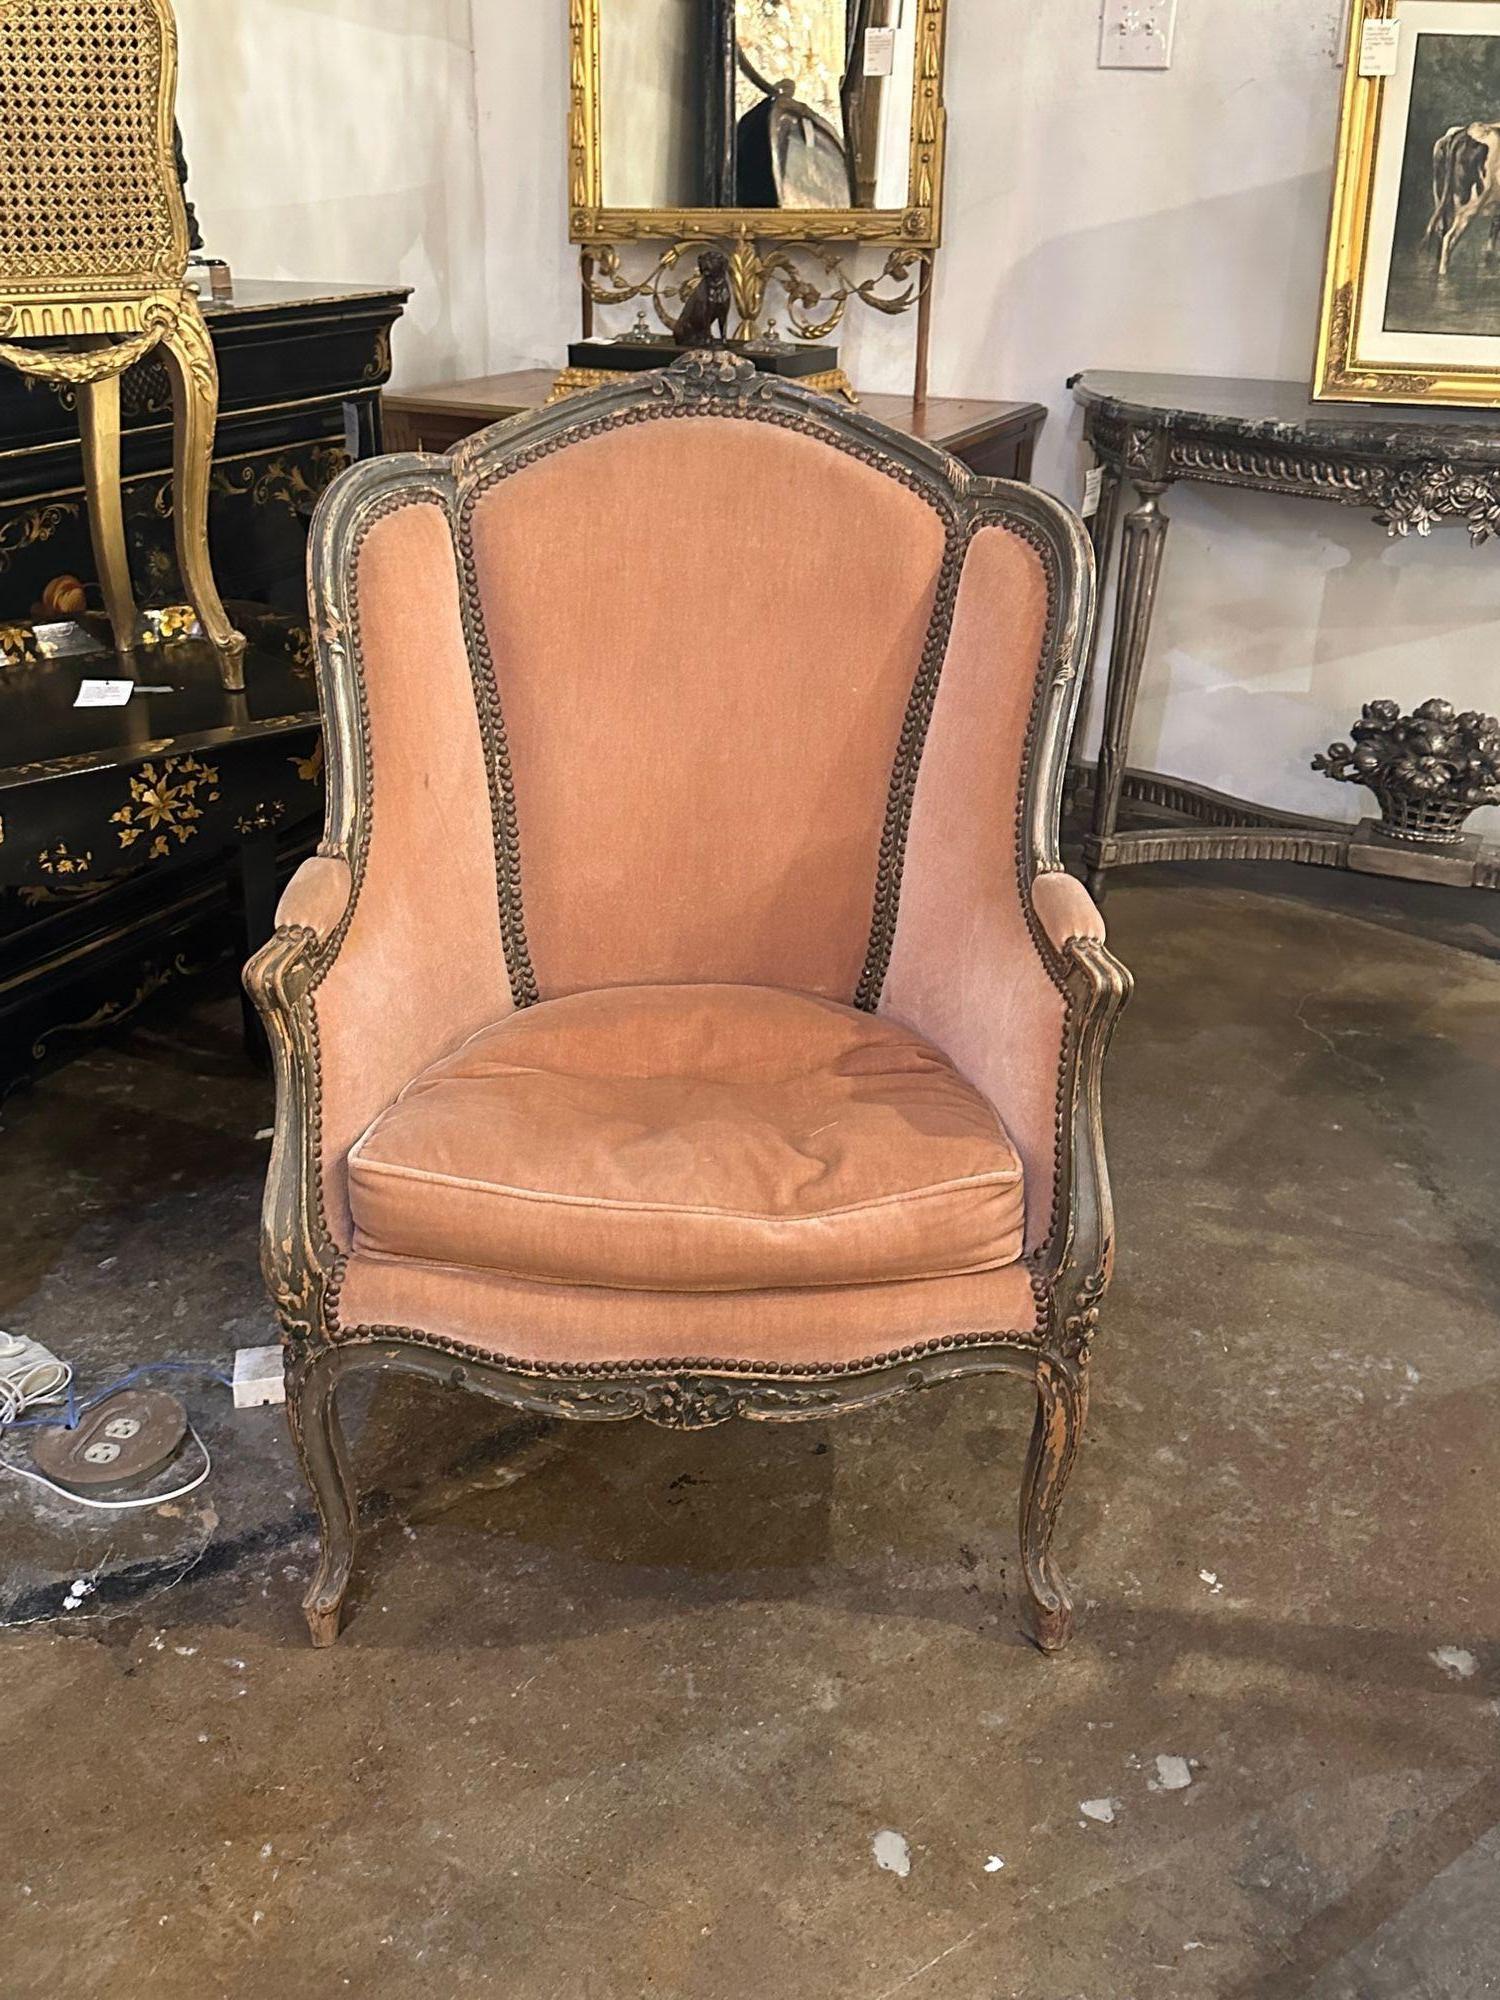 Lovely 18th century French Provincial carved and painted Bergere with blush velvet. A very fine piece with beautiful craftsmanship.  Outstanding!